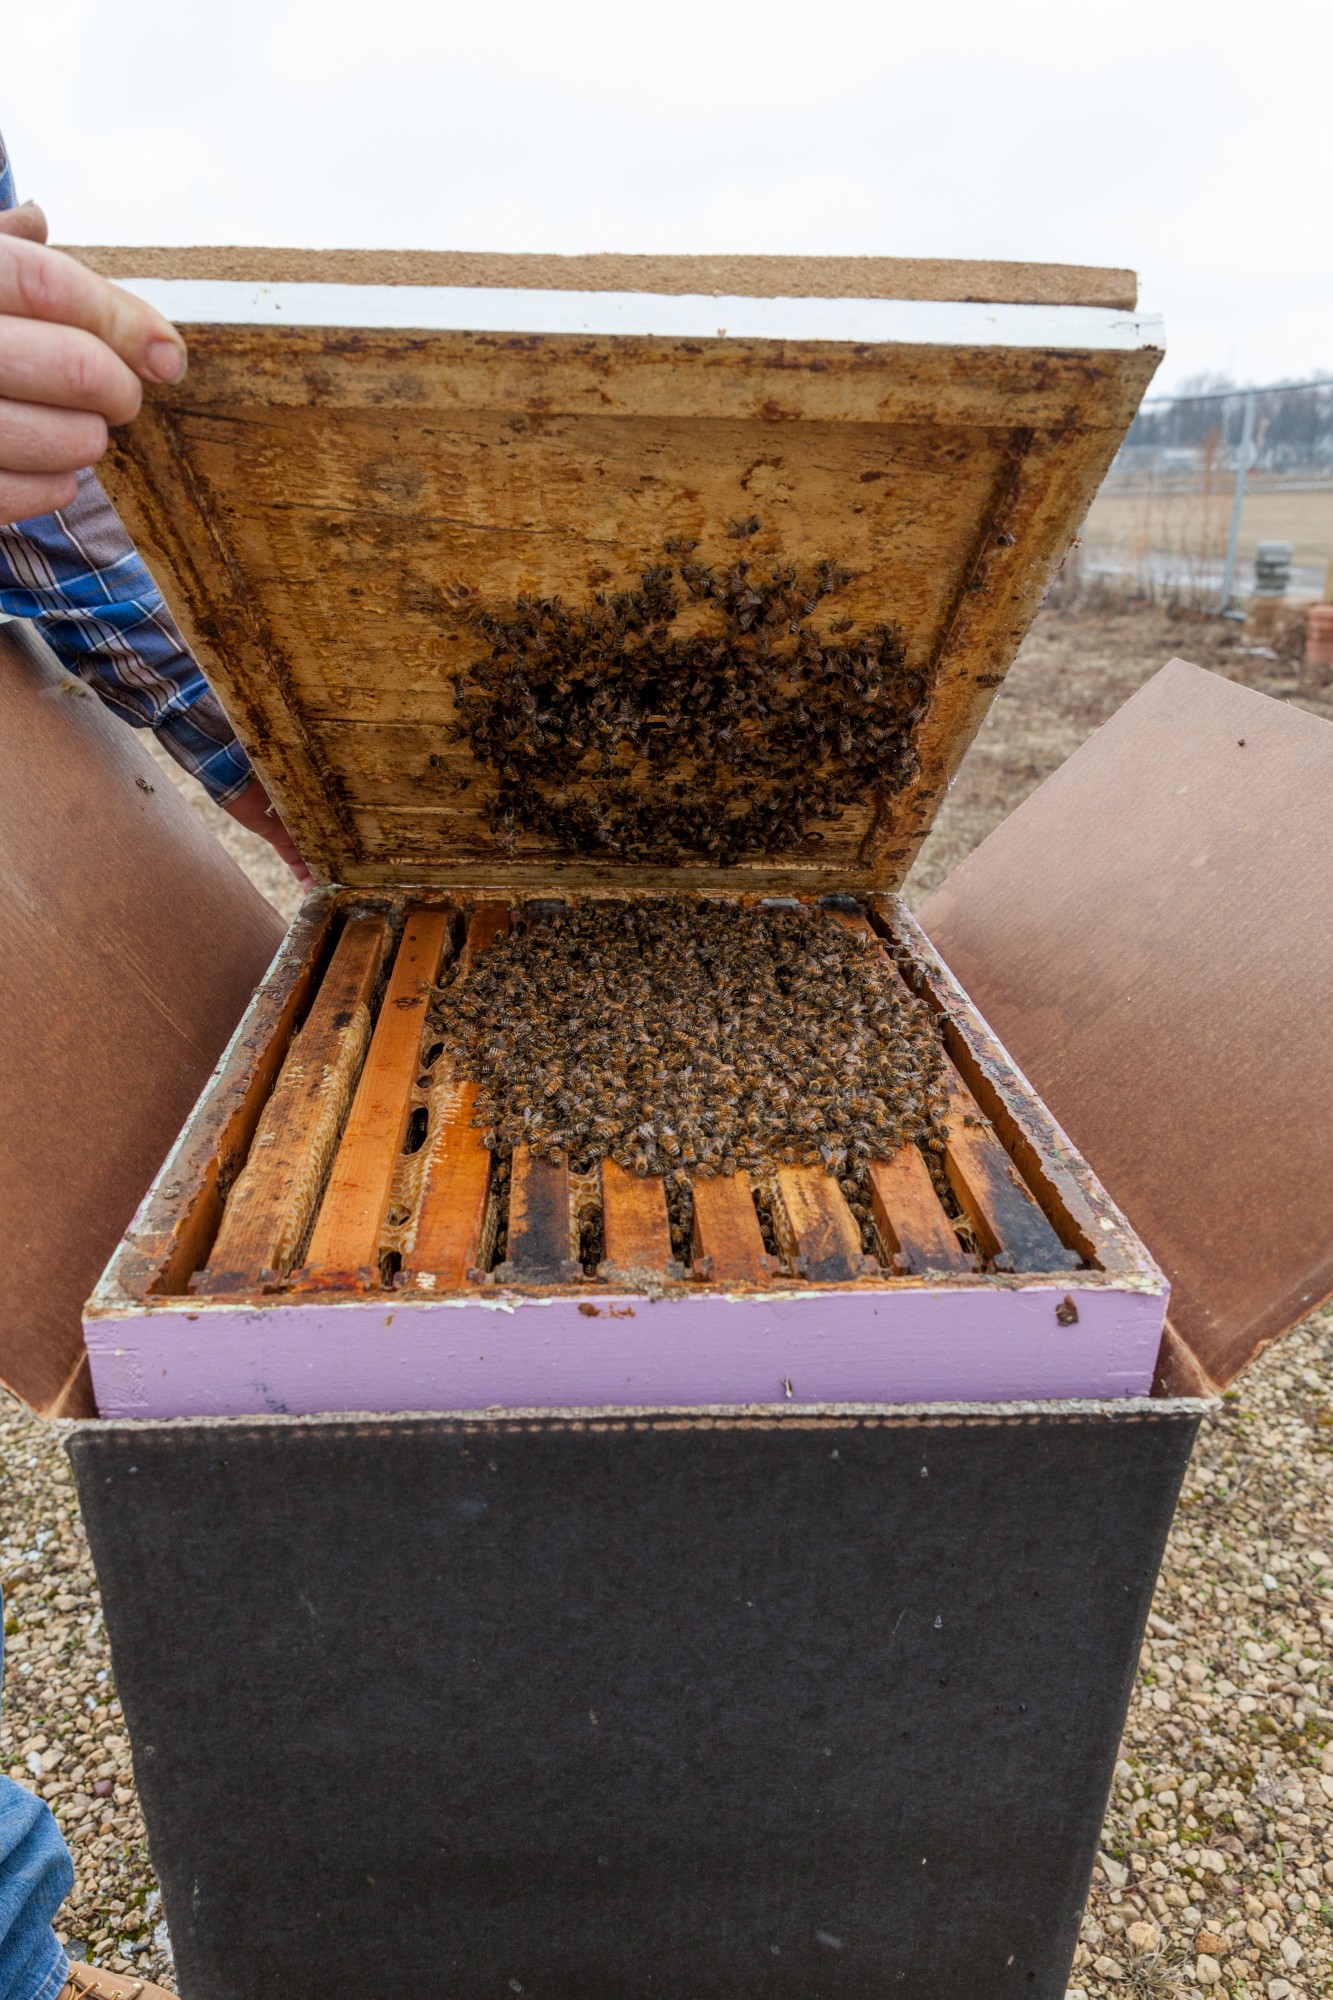 Beekeeper Gary Reuter opens a brood box at the University of Minnesota Bee Laboratory on Monday, March 16. The bees huddle together and flex their flight muscles in order to stay warm and survive the winter.